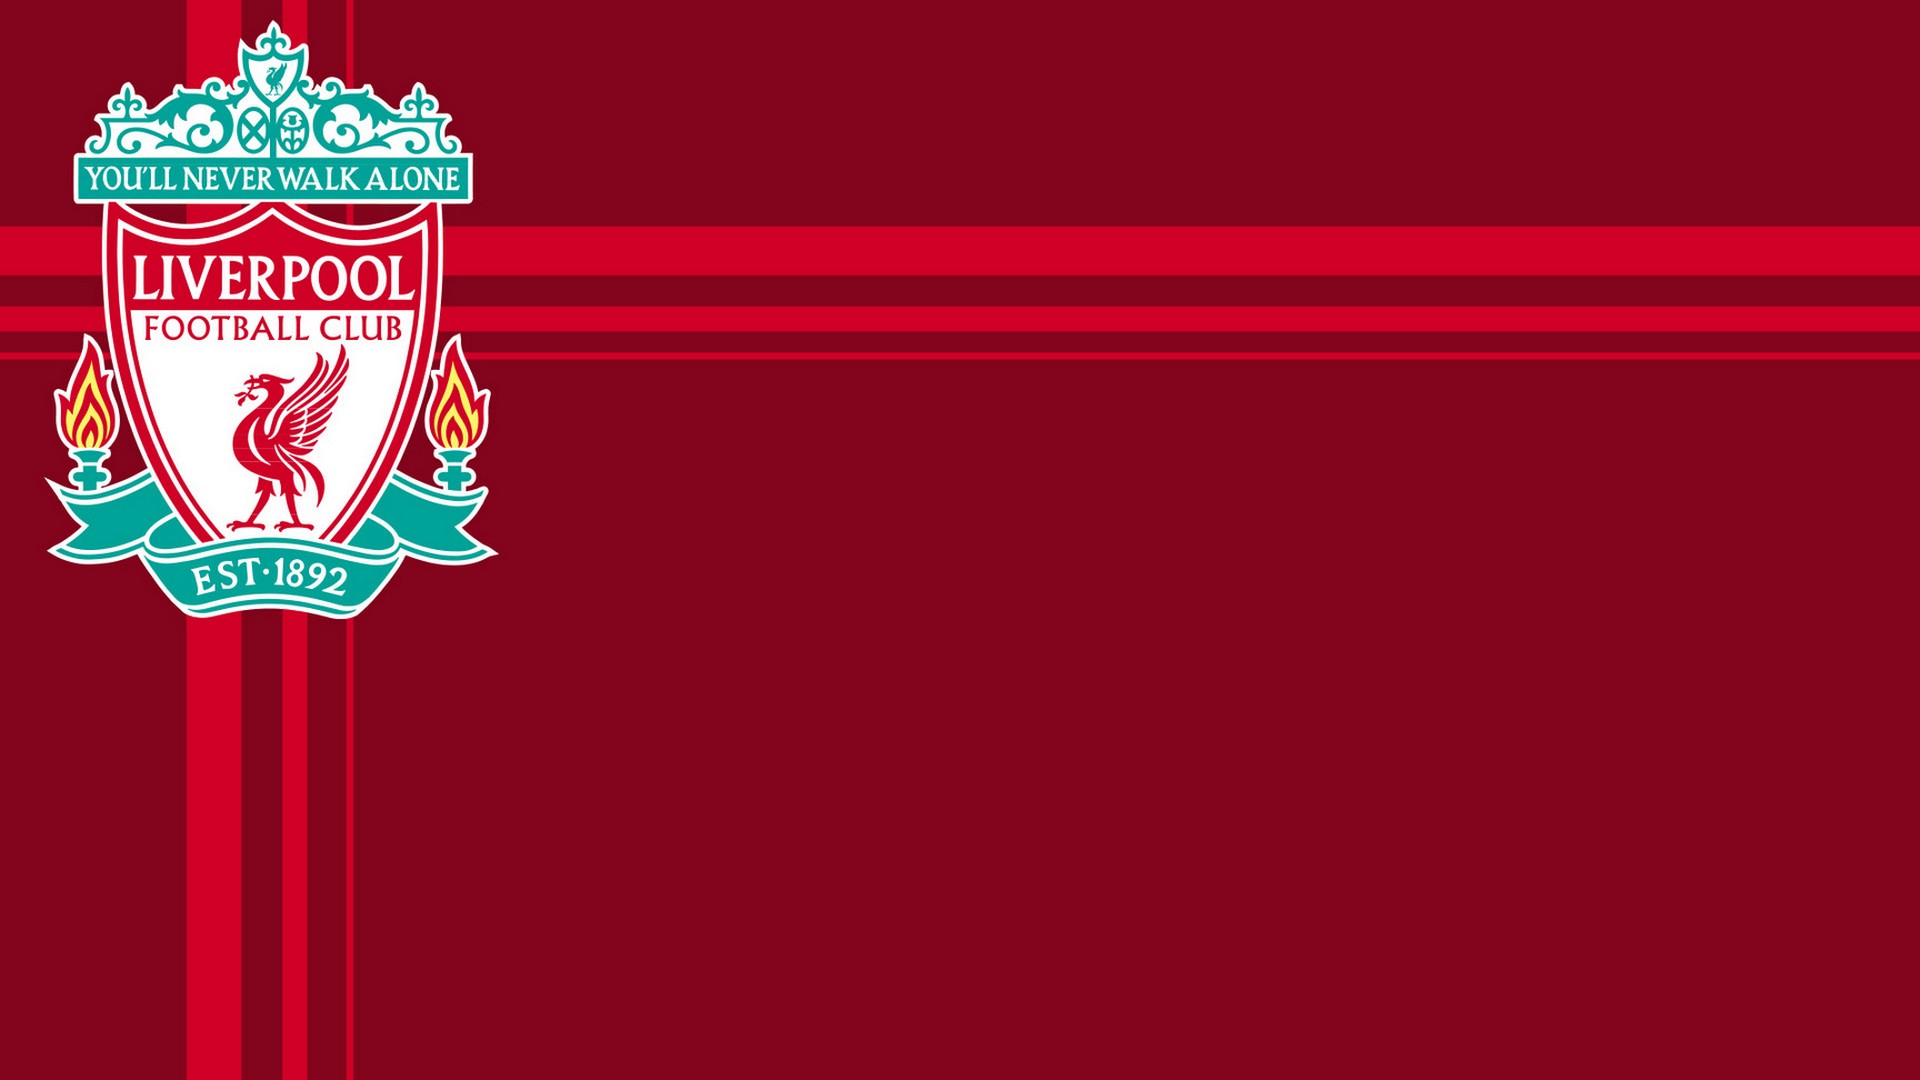 Wallpaper Desktop Liverpool HD with resolution 1920x1080 pixel. You can make this wallpaper for your Mac or Windows Desktop Background, iPhone, Android or Tablet and another Smartphone device